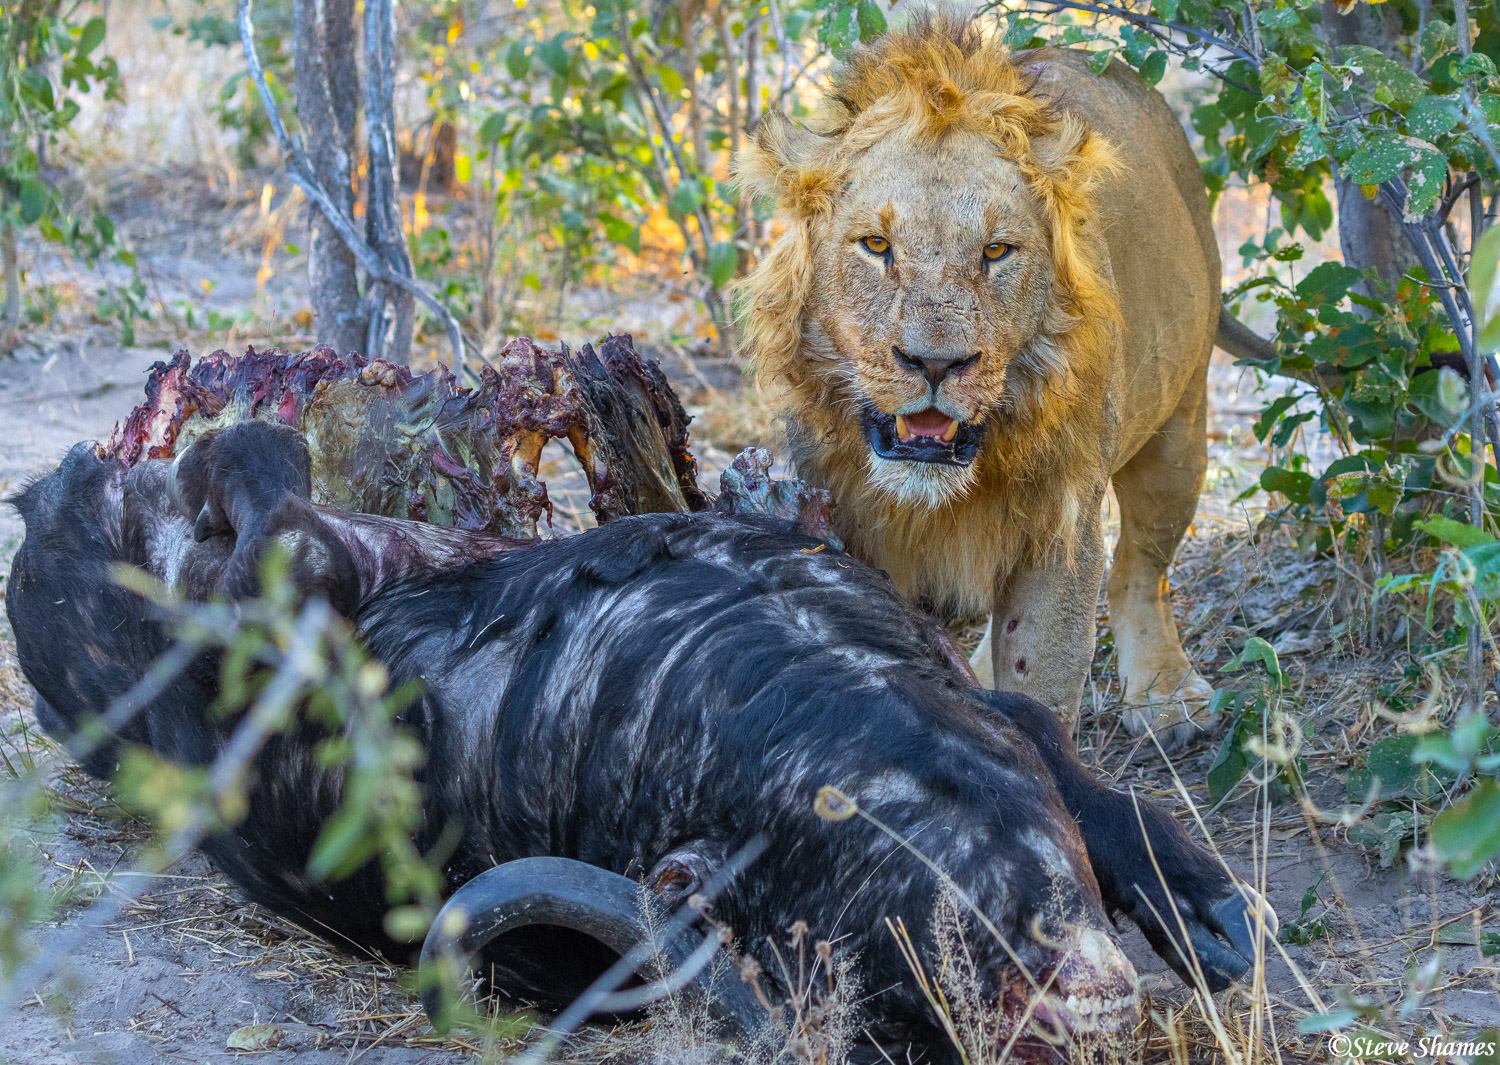 One of the lion brothers posing by their buffalo kill.